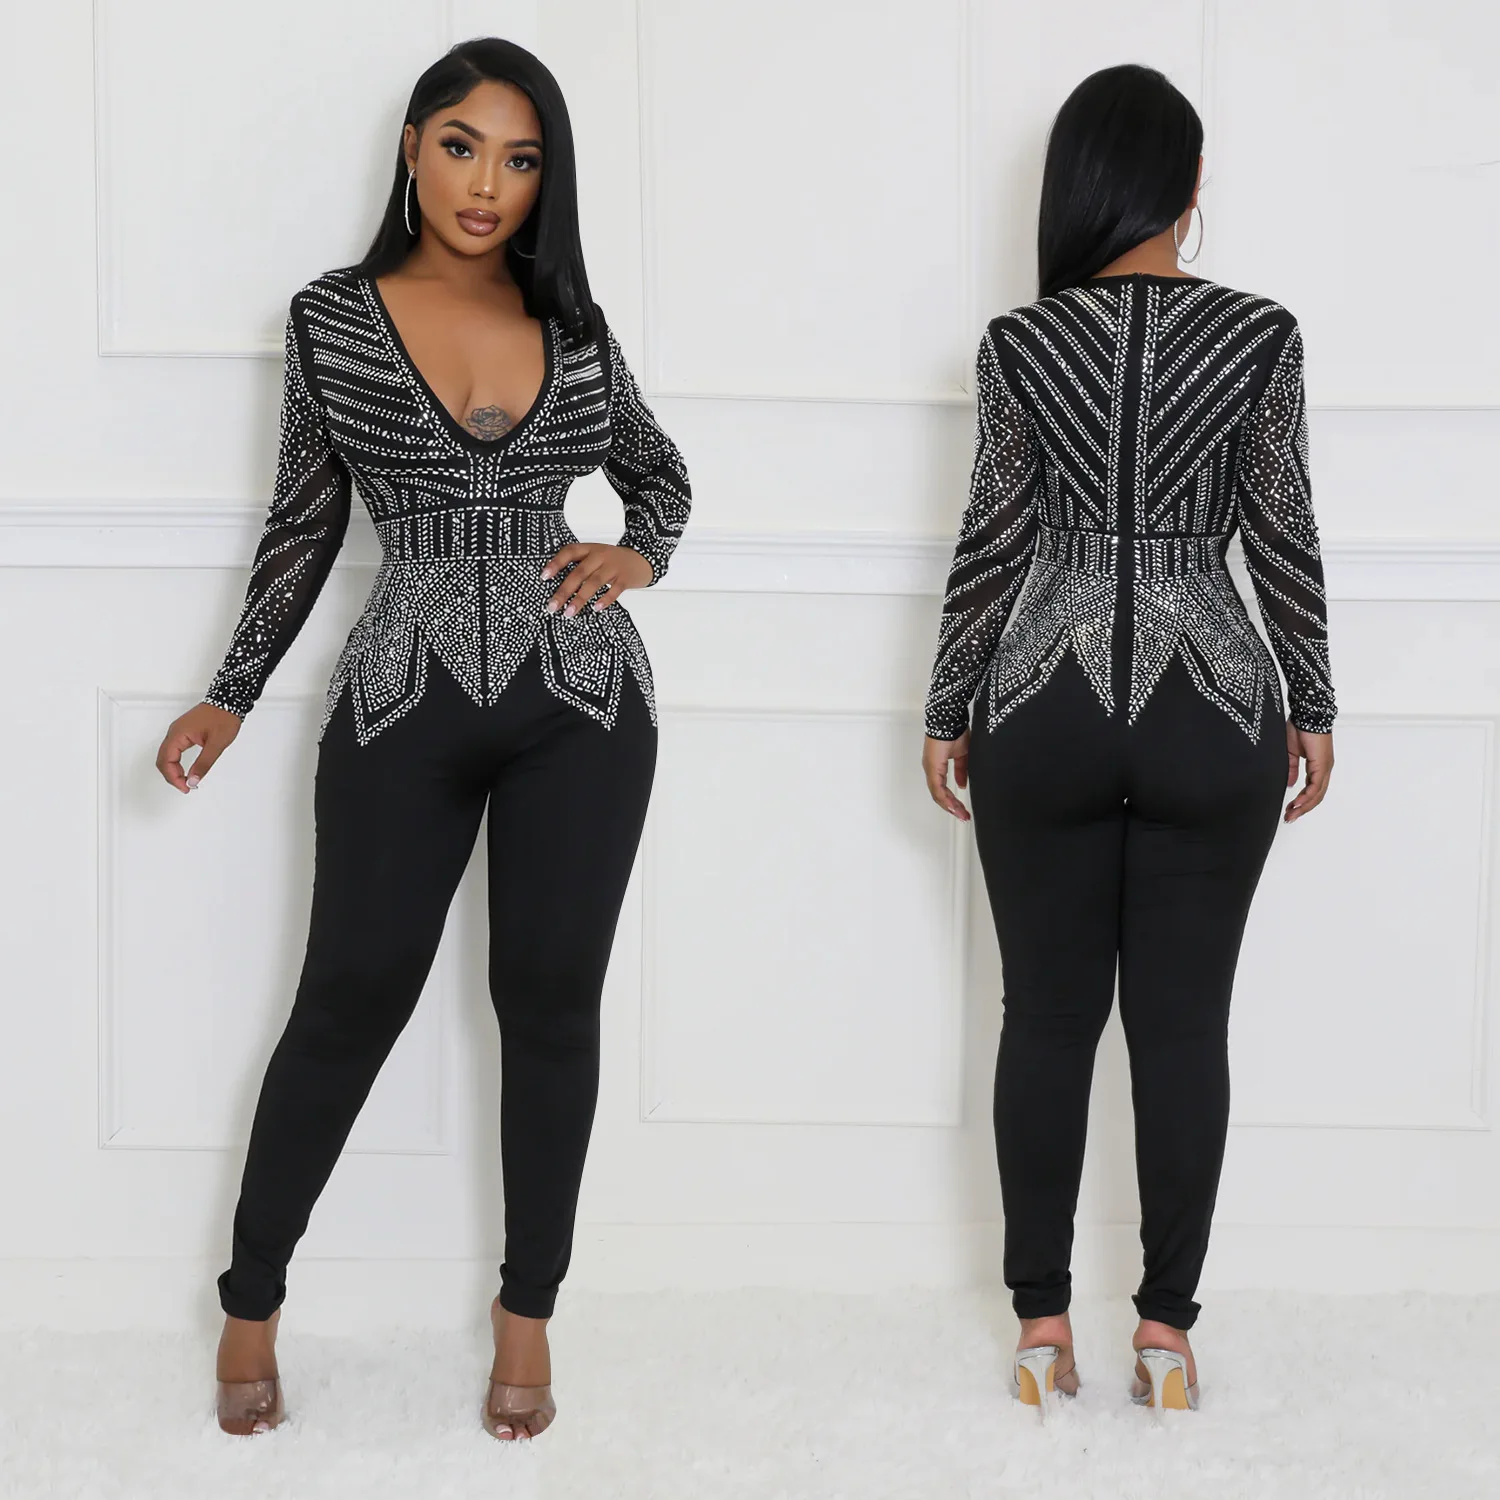 Women's V-Neck Long Sleeved Jumpsuit, Monochromatic Pants, Hot Diamond, European and American Fashion, Amazon Hot Selling 2023 spring female long sleeve solid bodycon jumpsuit bright line decoration black jumpsuit for women one piece sexy club outfit